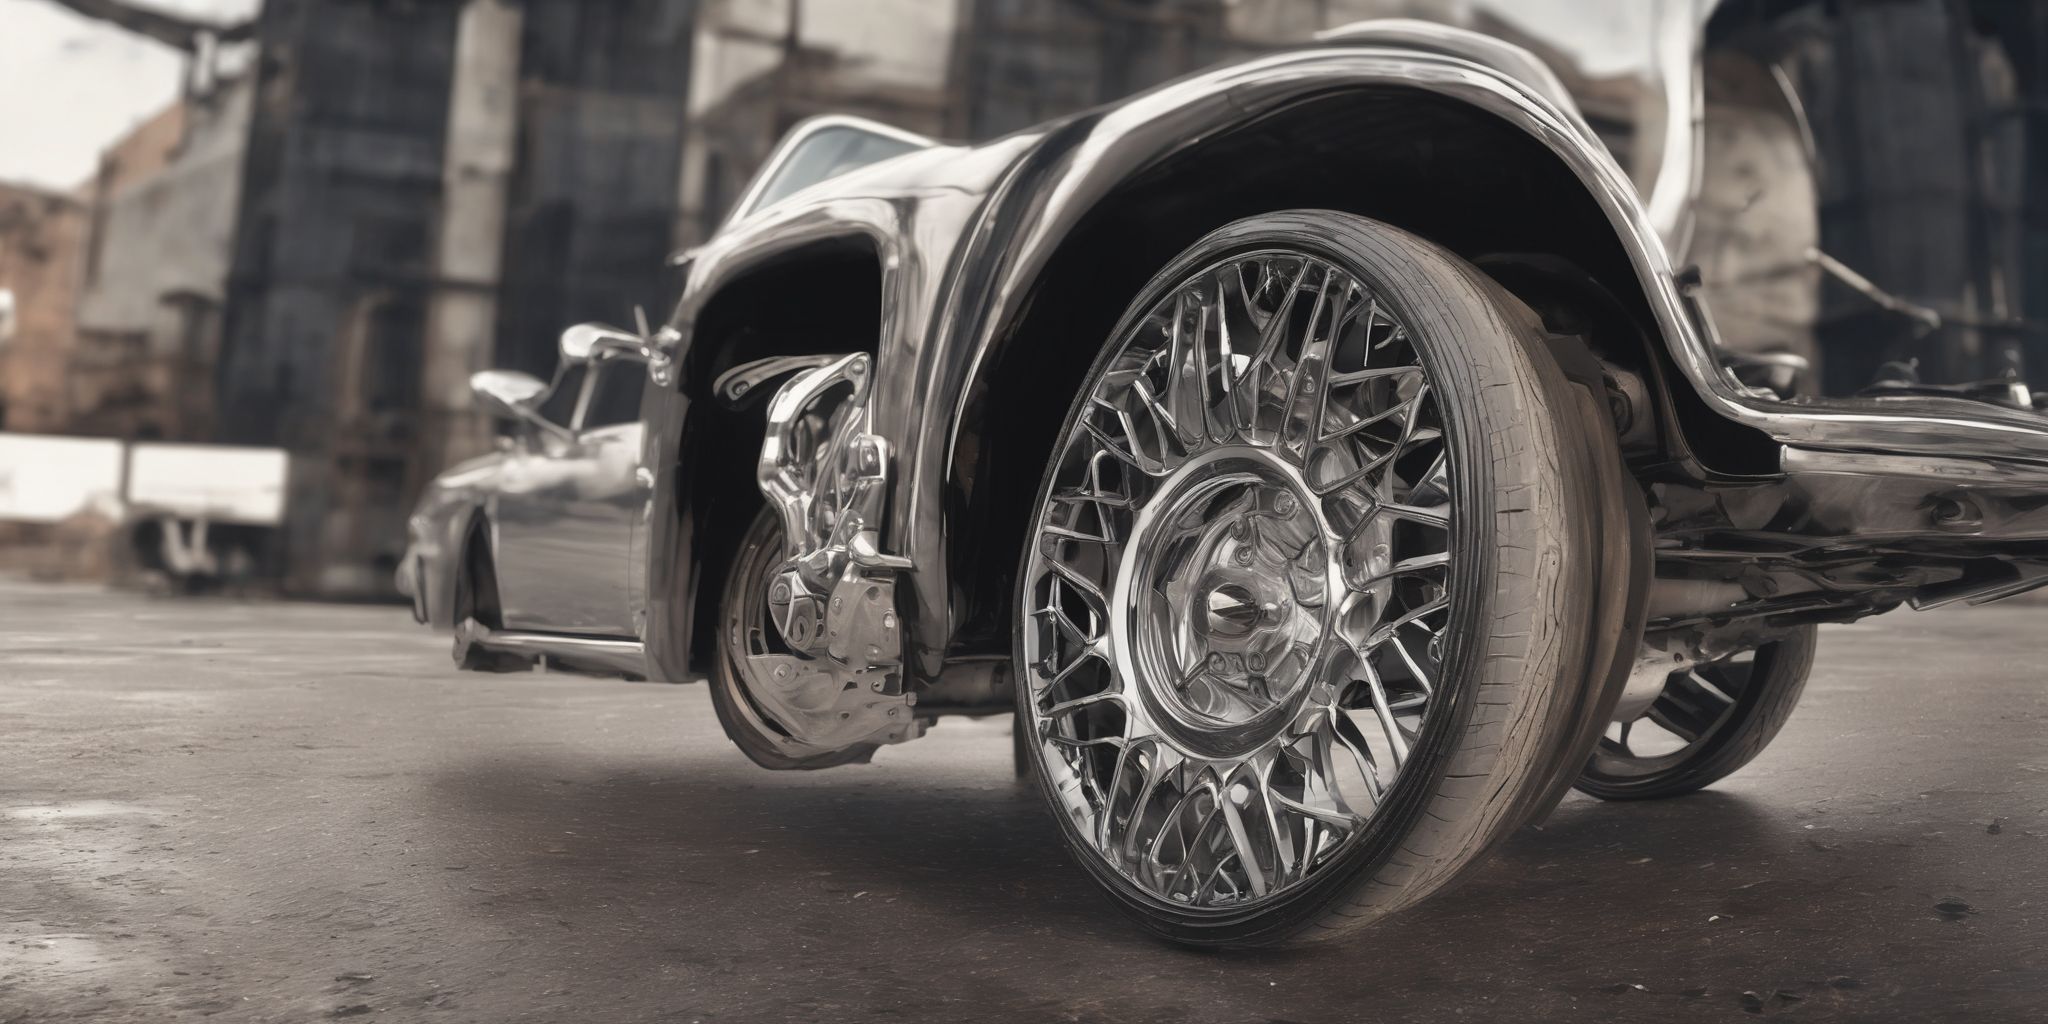 Wheel  in realistic, photographic style